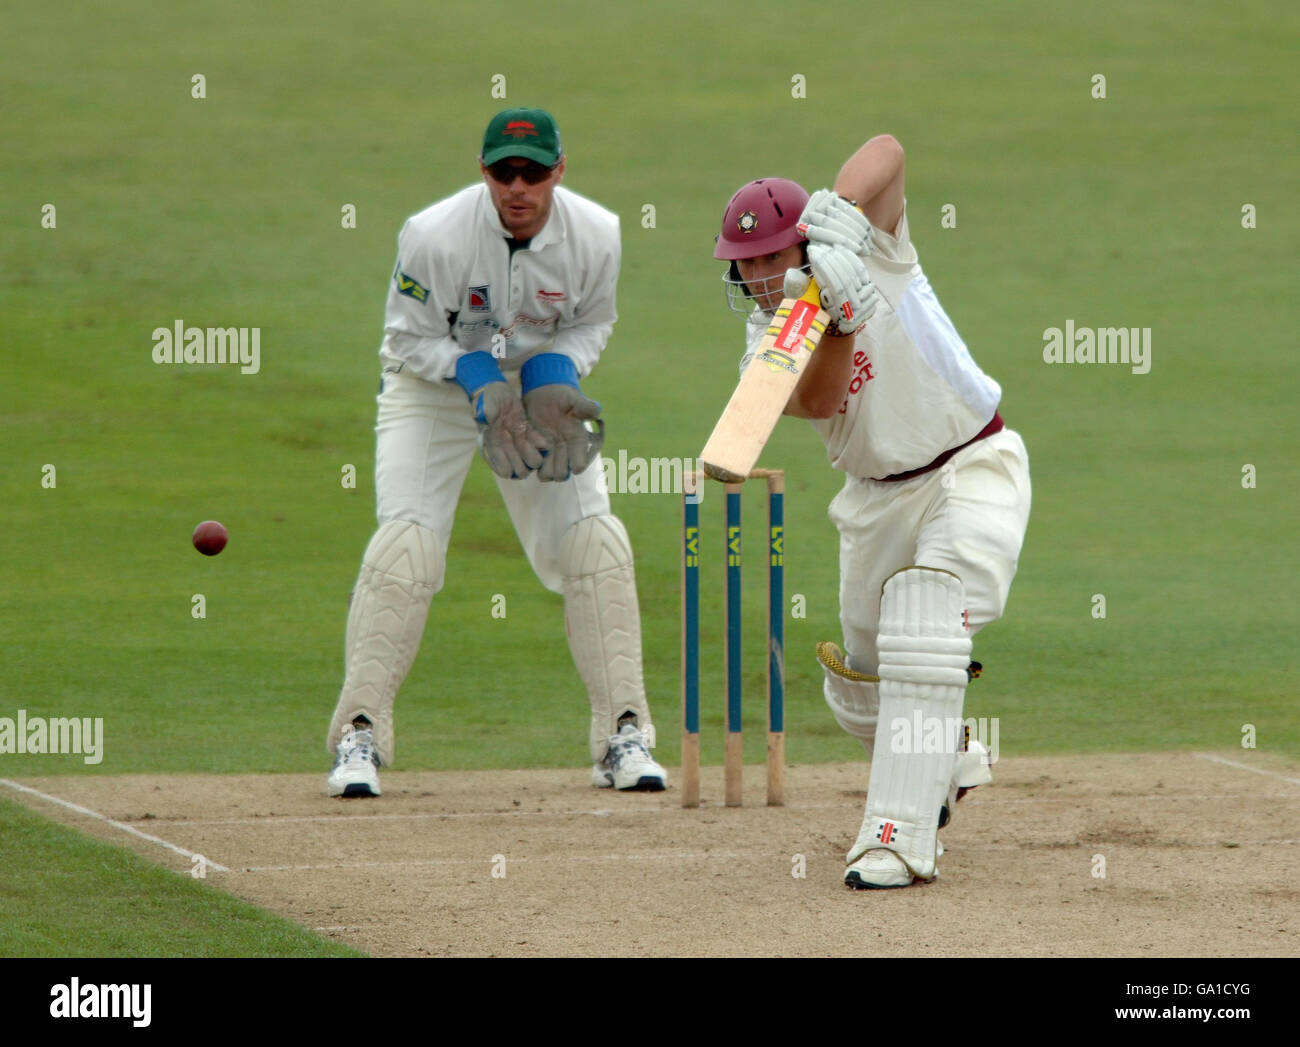 Northamptonshire's Stephen Crook in action against Leicestershire during the Liverpool Victoria County Championship Division Two match at The County Cricket Ground, Wantage Road, Northampton. Stock Photo